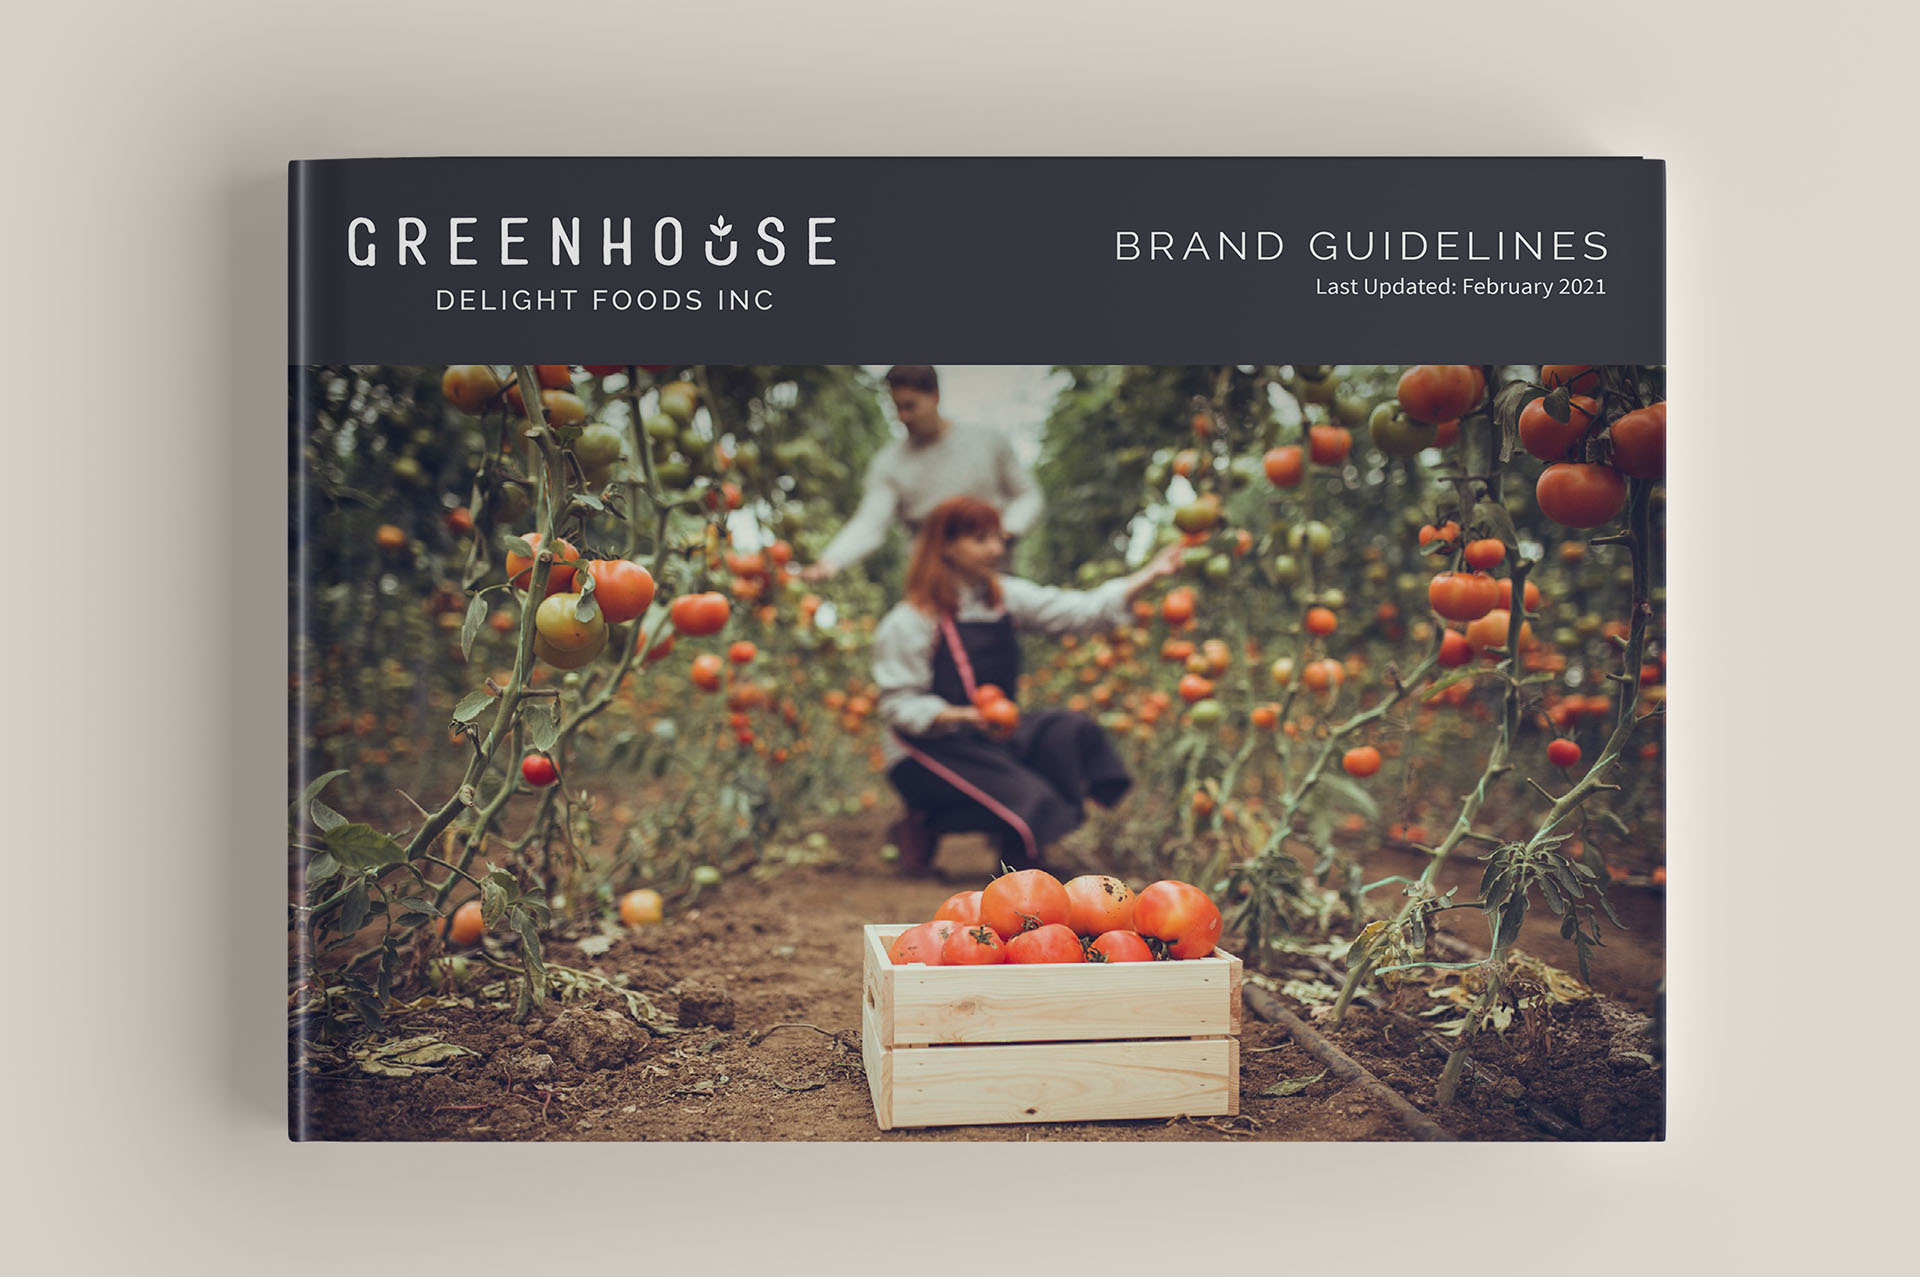 Greenhouse brand guidelines cover